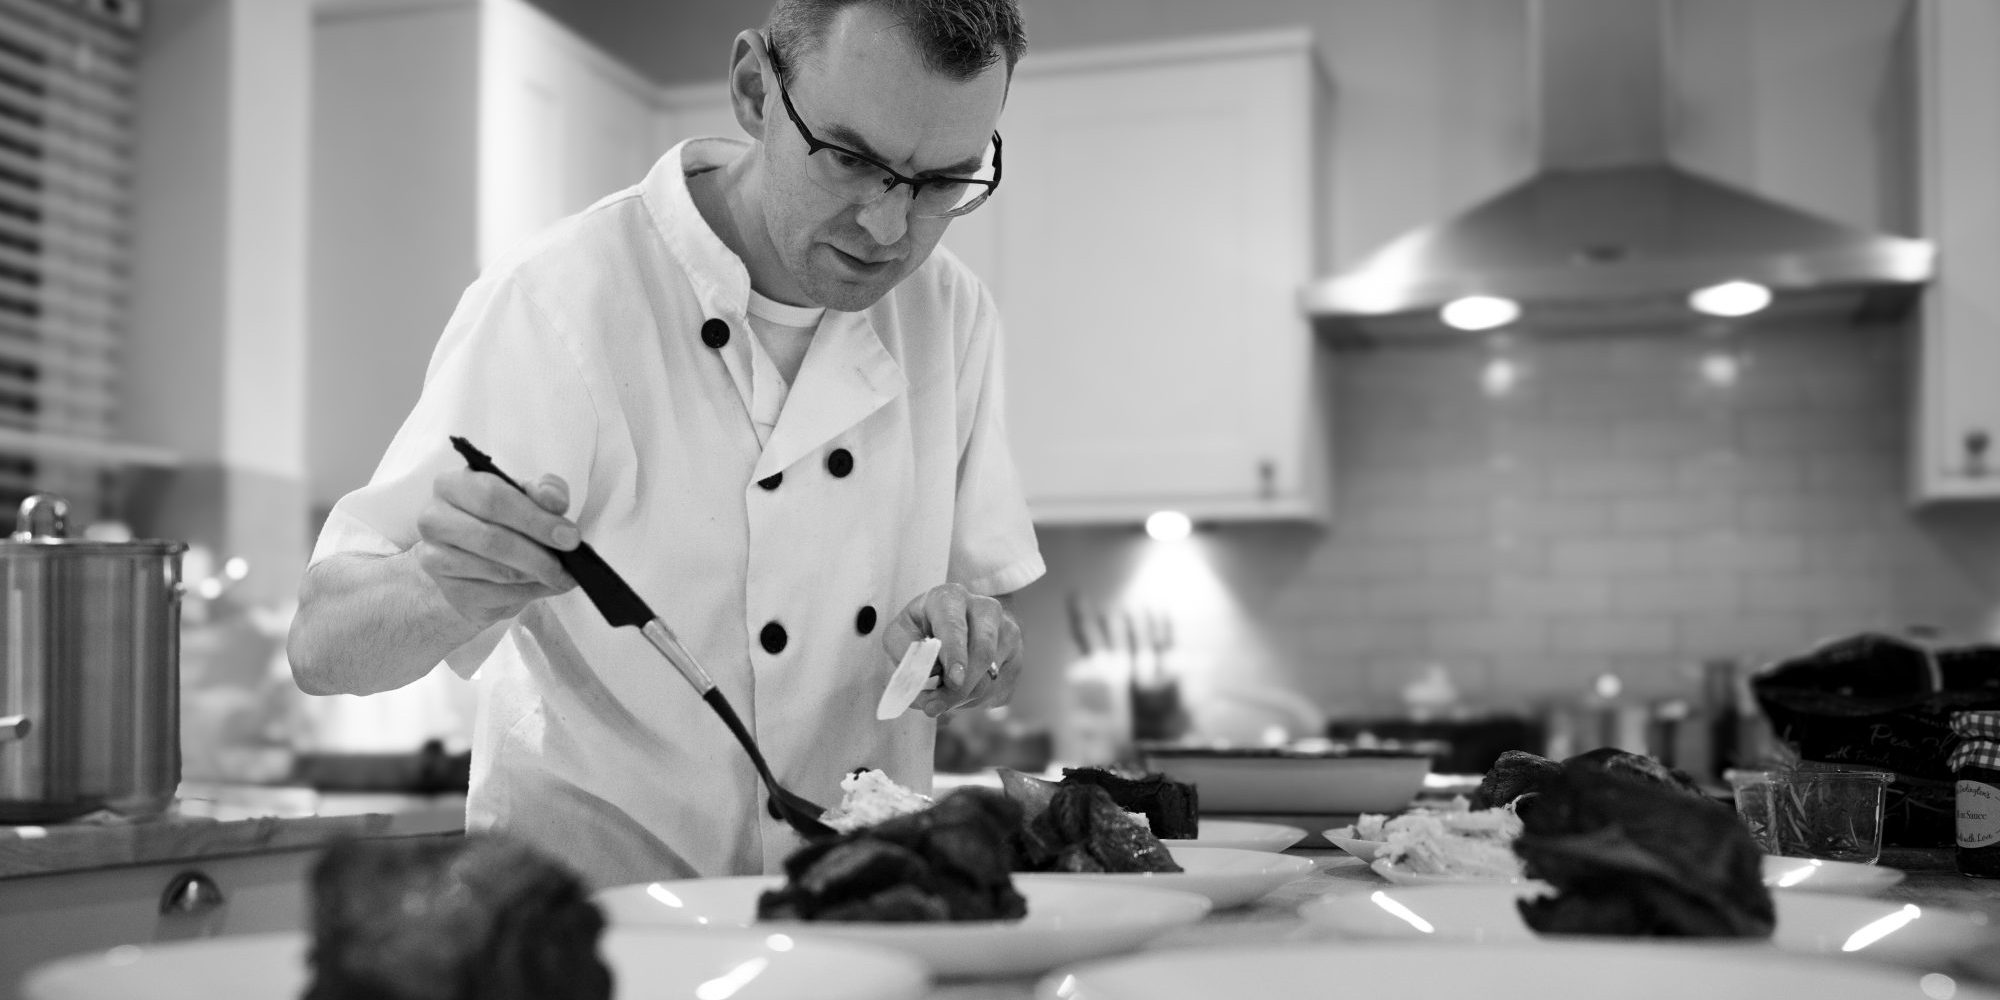 Photo of Shaun Nixon The Cook in the North serving by photographer Richard Willett